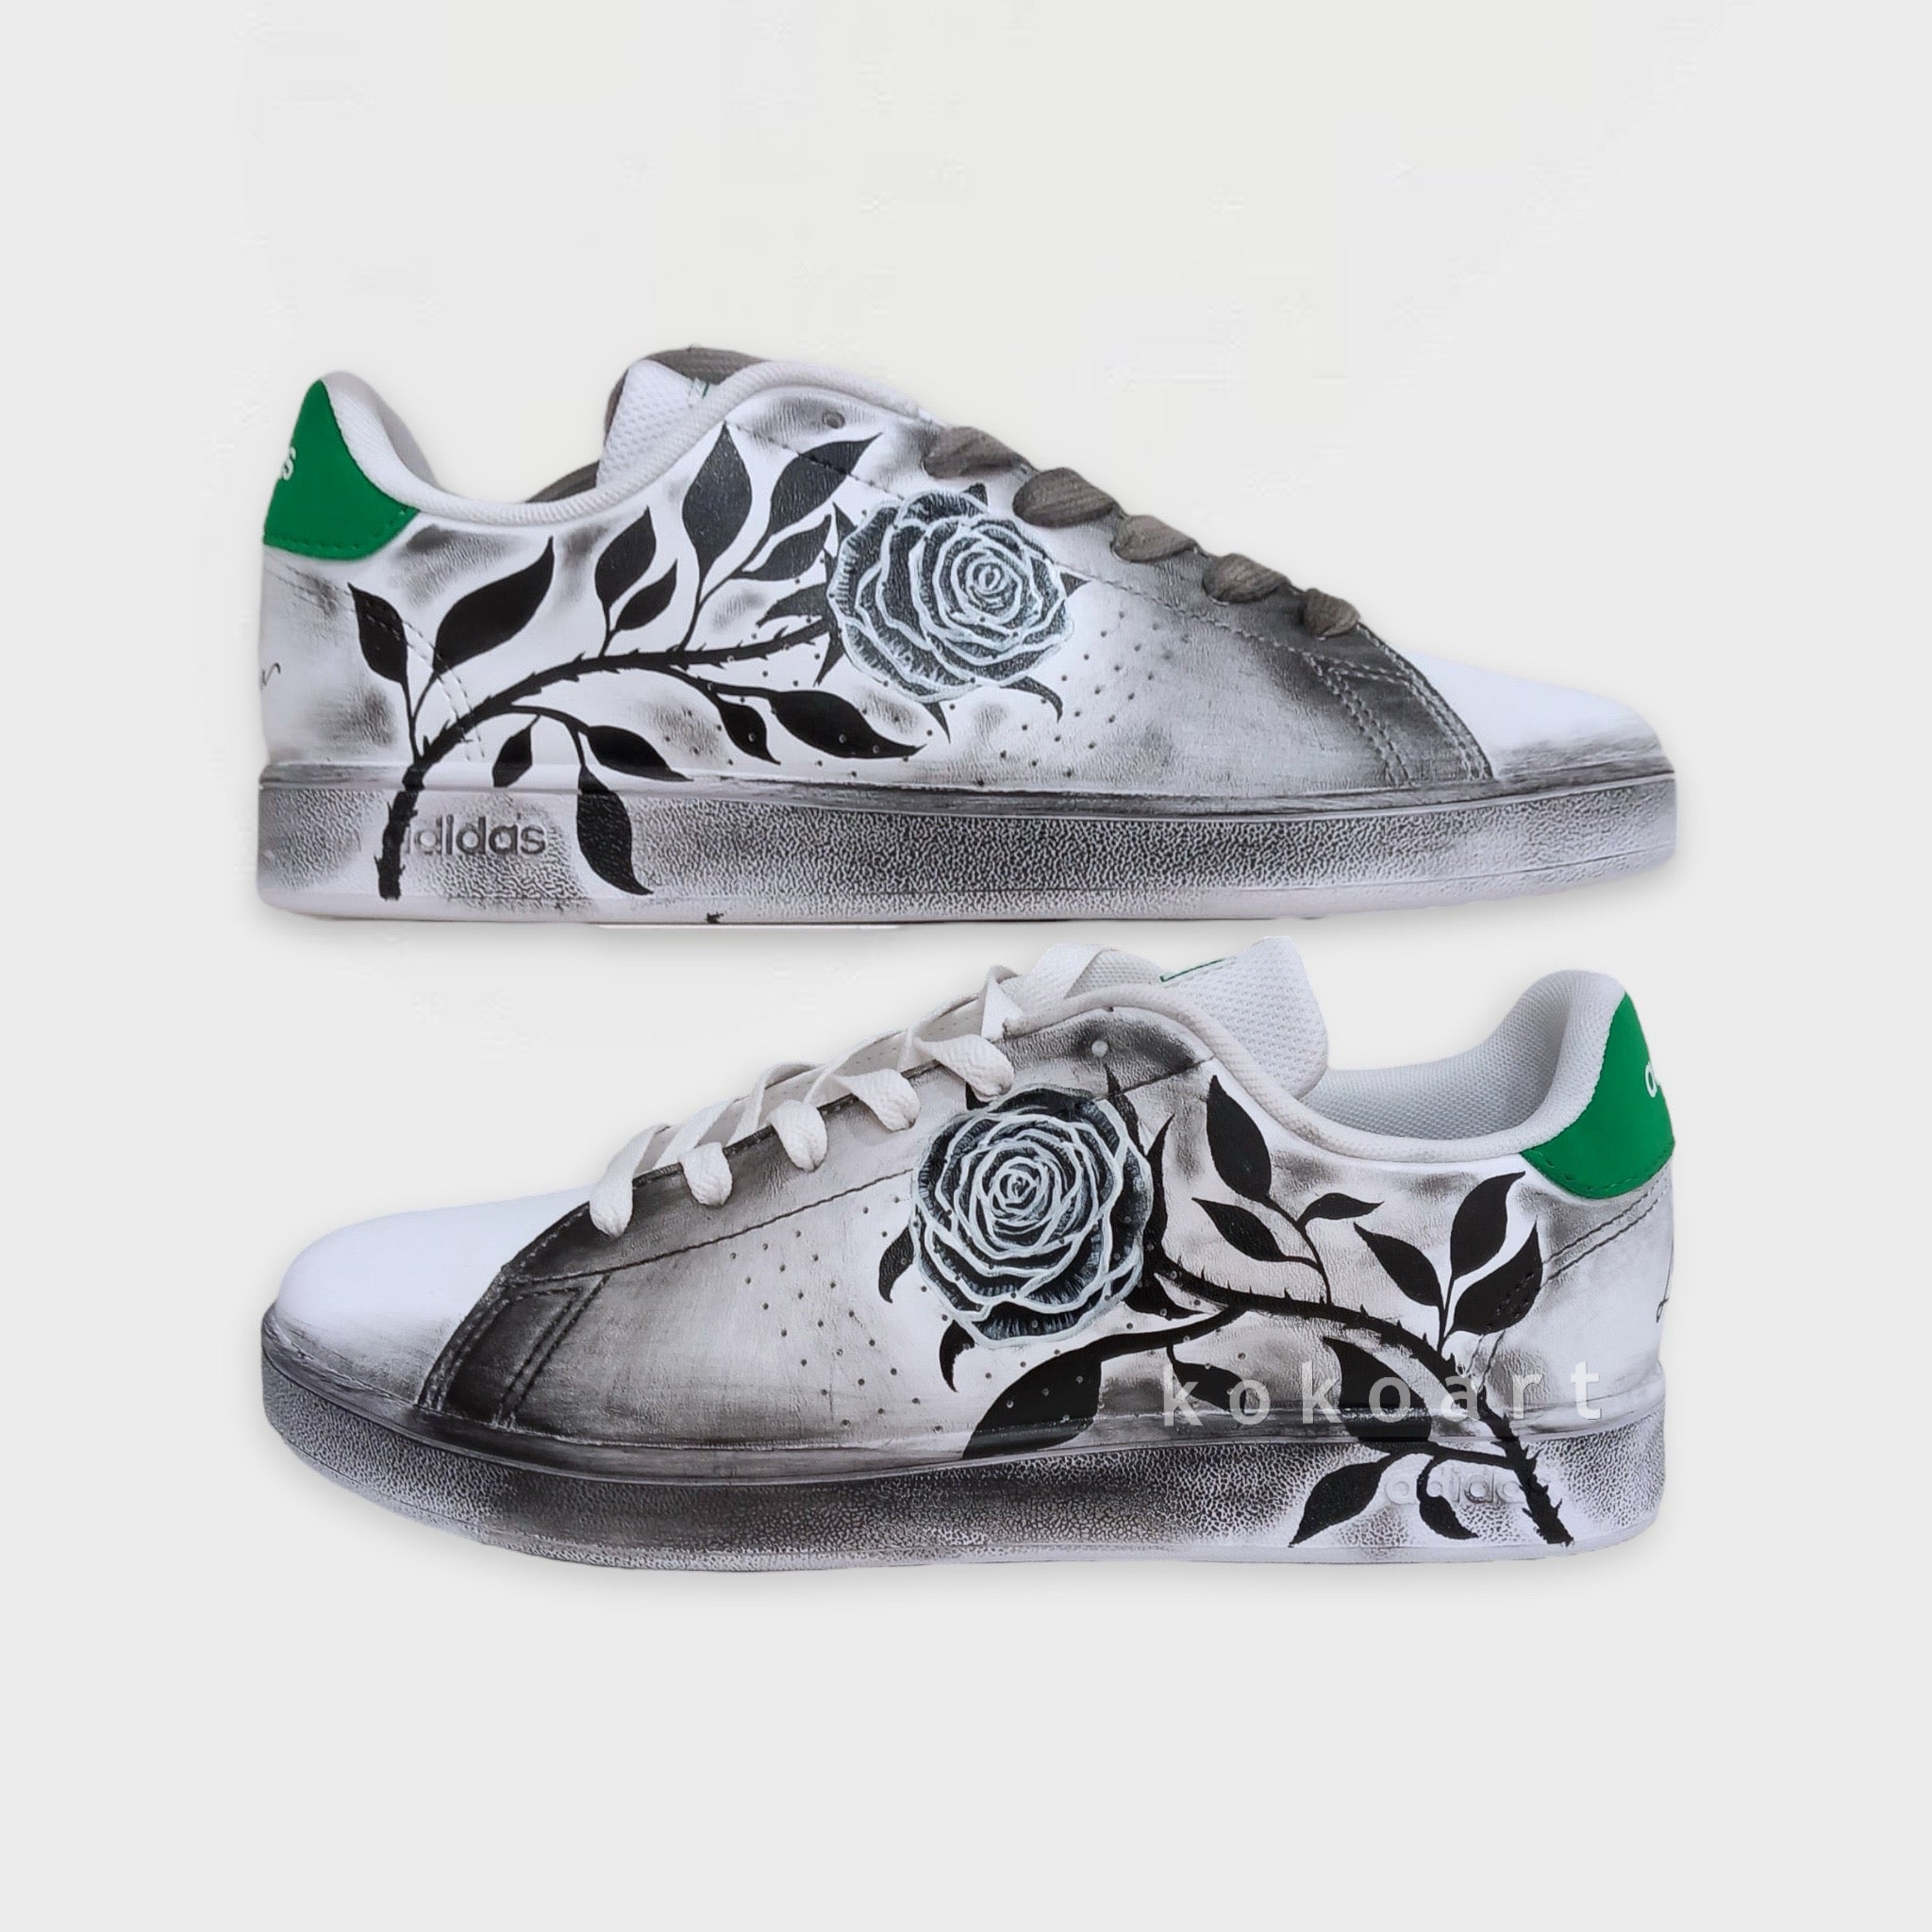 Stan Smith Hand Painted Black Roses